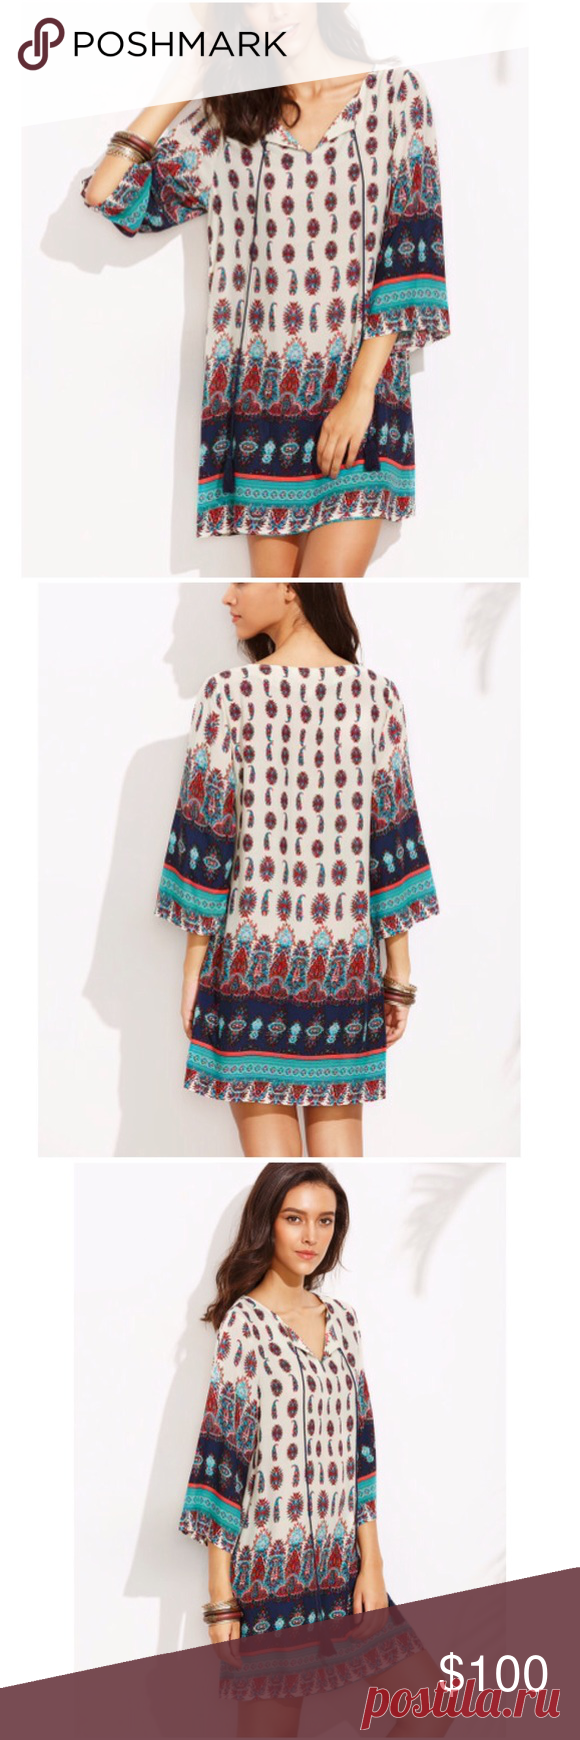 Last1️⃣! Tribal Print Tassel Front Tunic Dress Beautiful & easy-to-wear tunic dress with a lovely navy blue/turquoise/red paisley tribal print on a white background. Wide 3/4 sleeves. Cute navy blue tassels hang from the modest v-neck front. A cute piece for fall! 100% rayon. Small: 39.5